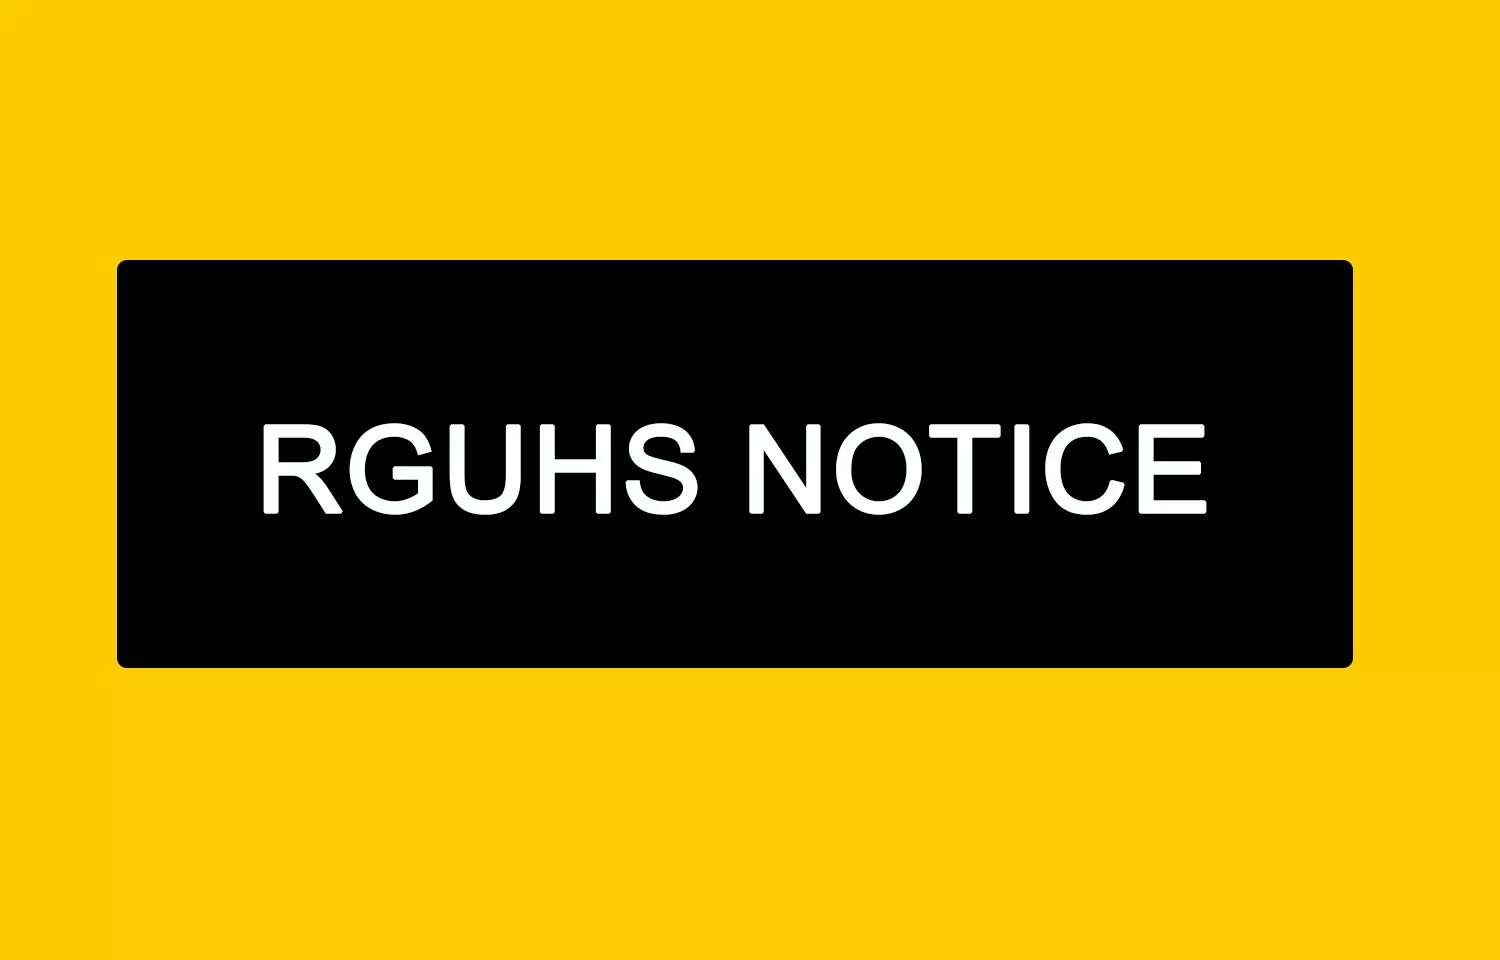 RGUHS releases Conduct of BSc Nursing, Post Basic Nursing course Supplementary exam April 2021